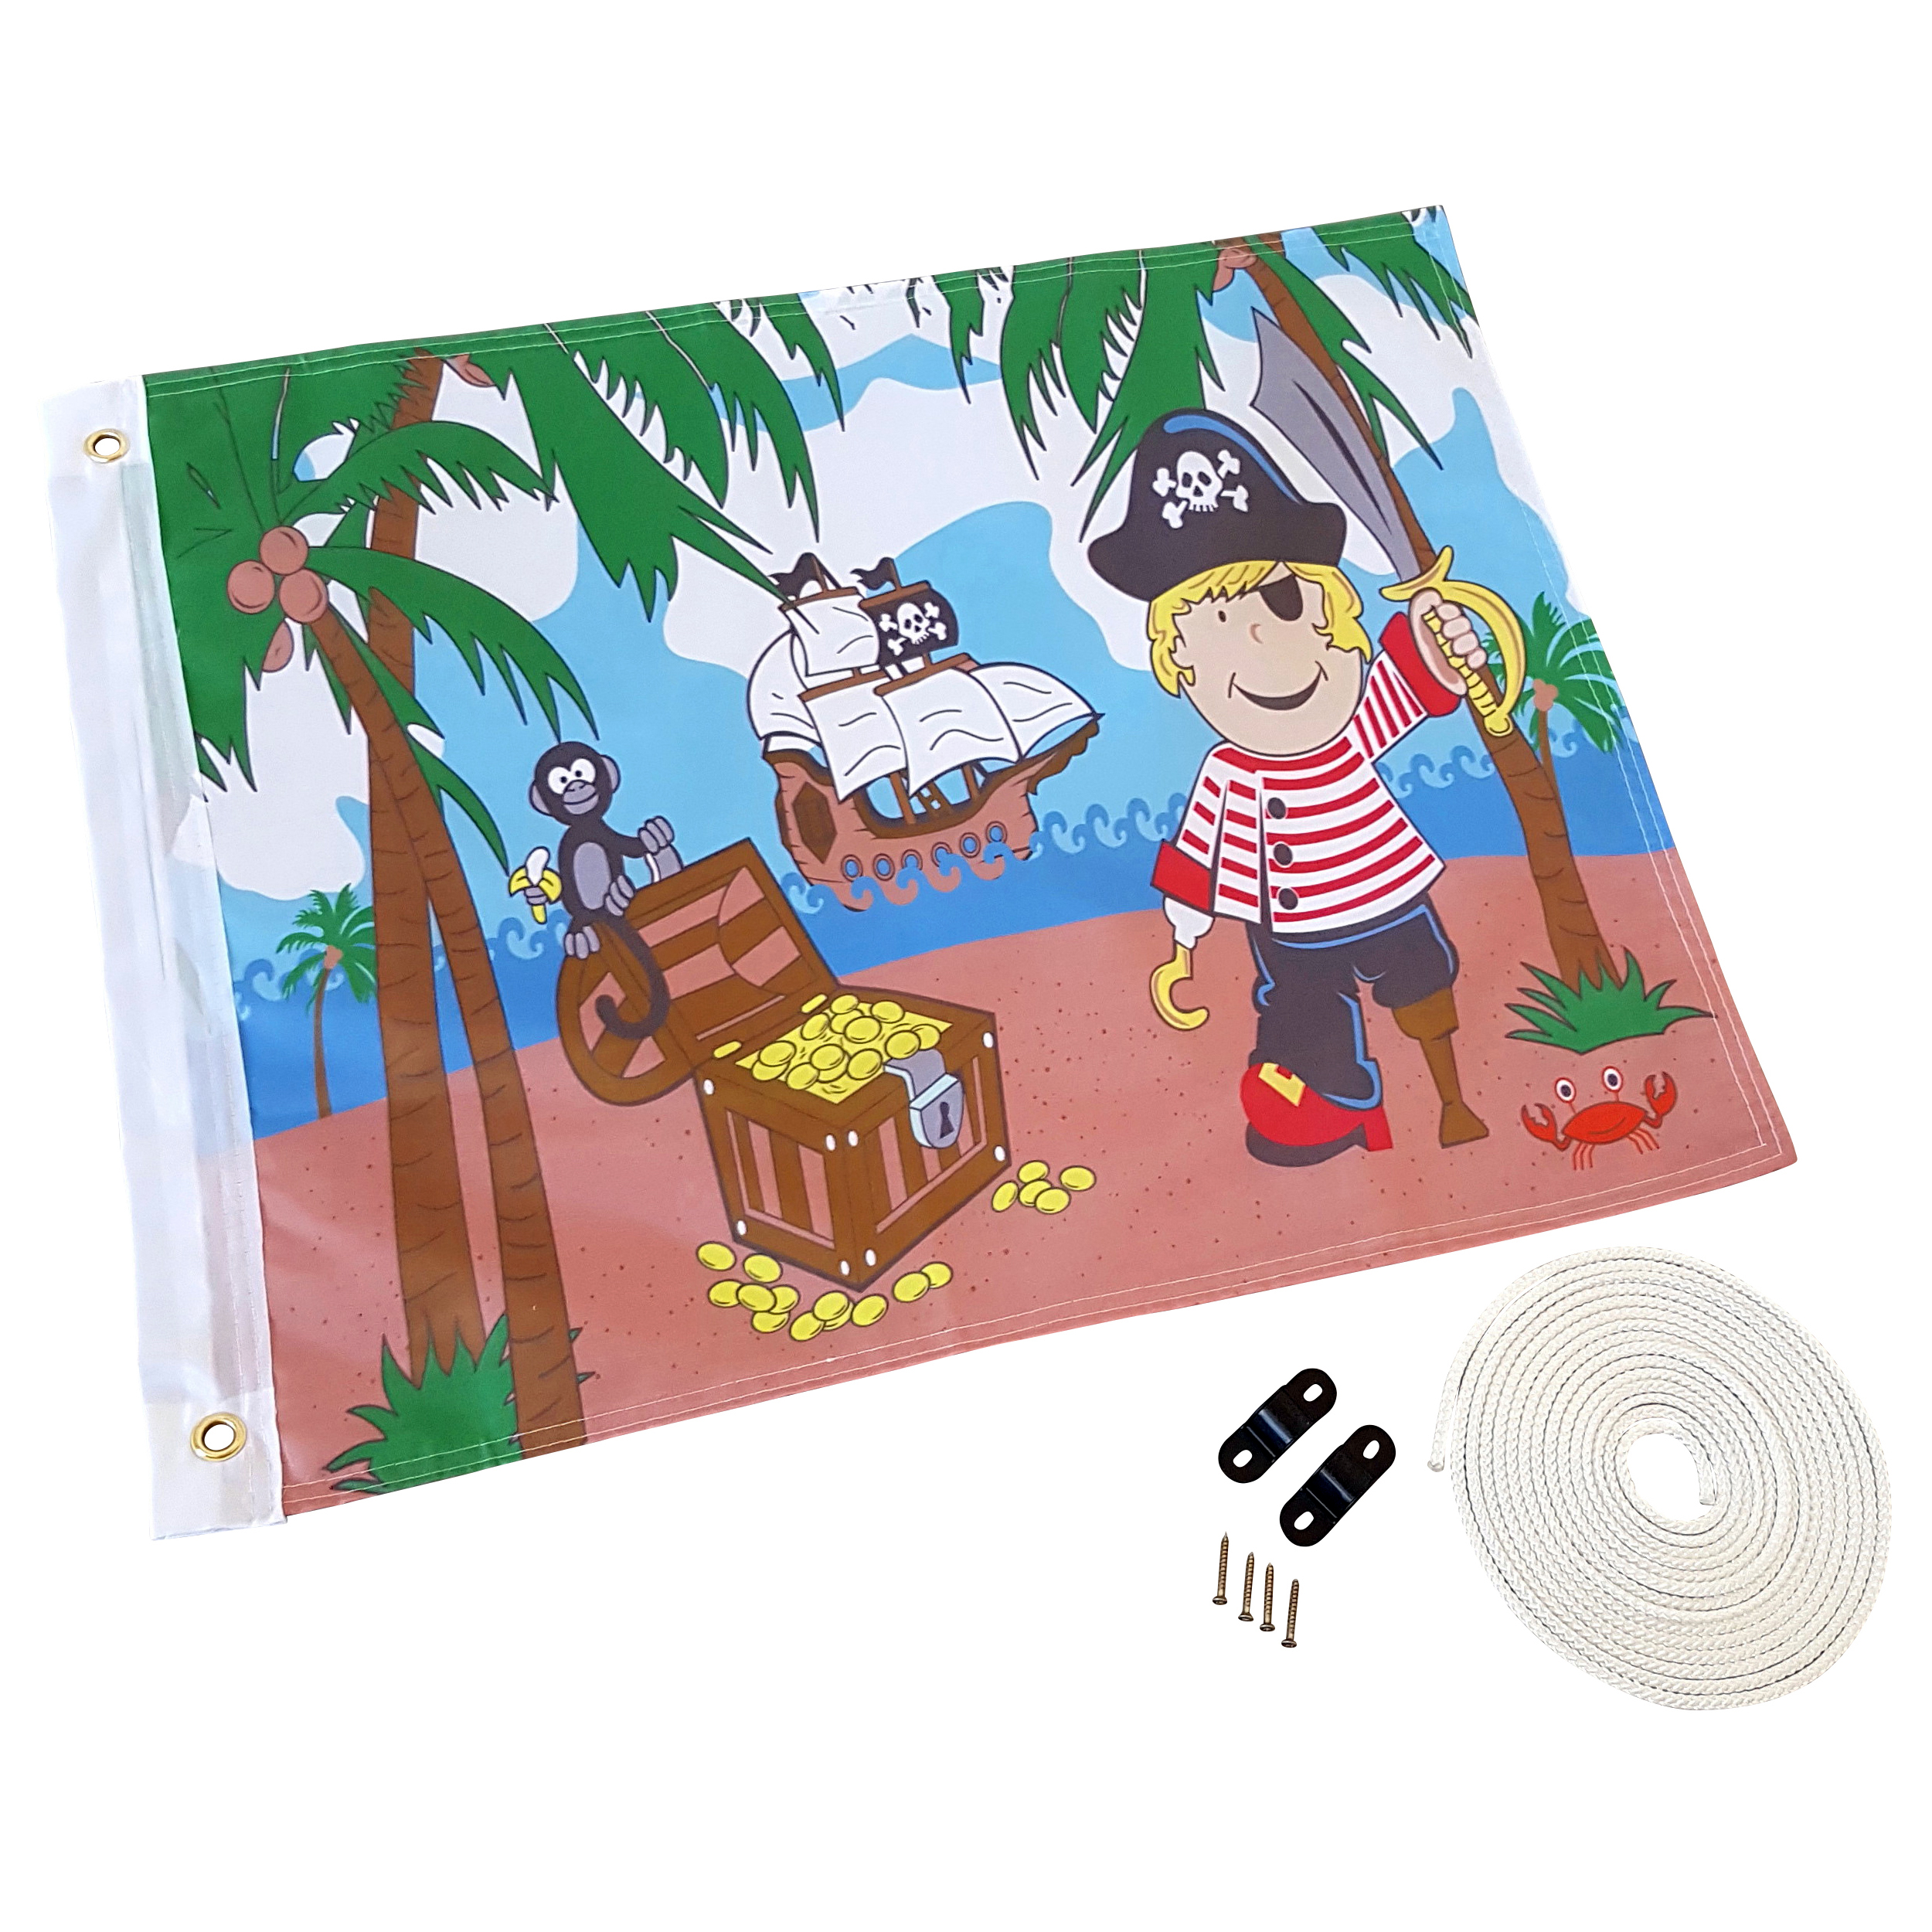 KERSA pirate flag for children, with hoisting system